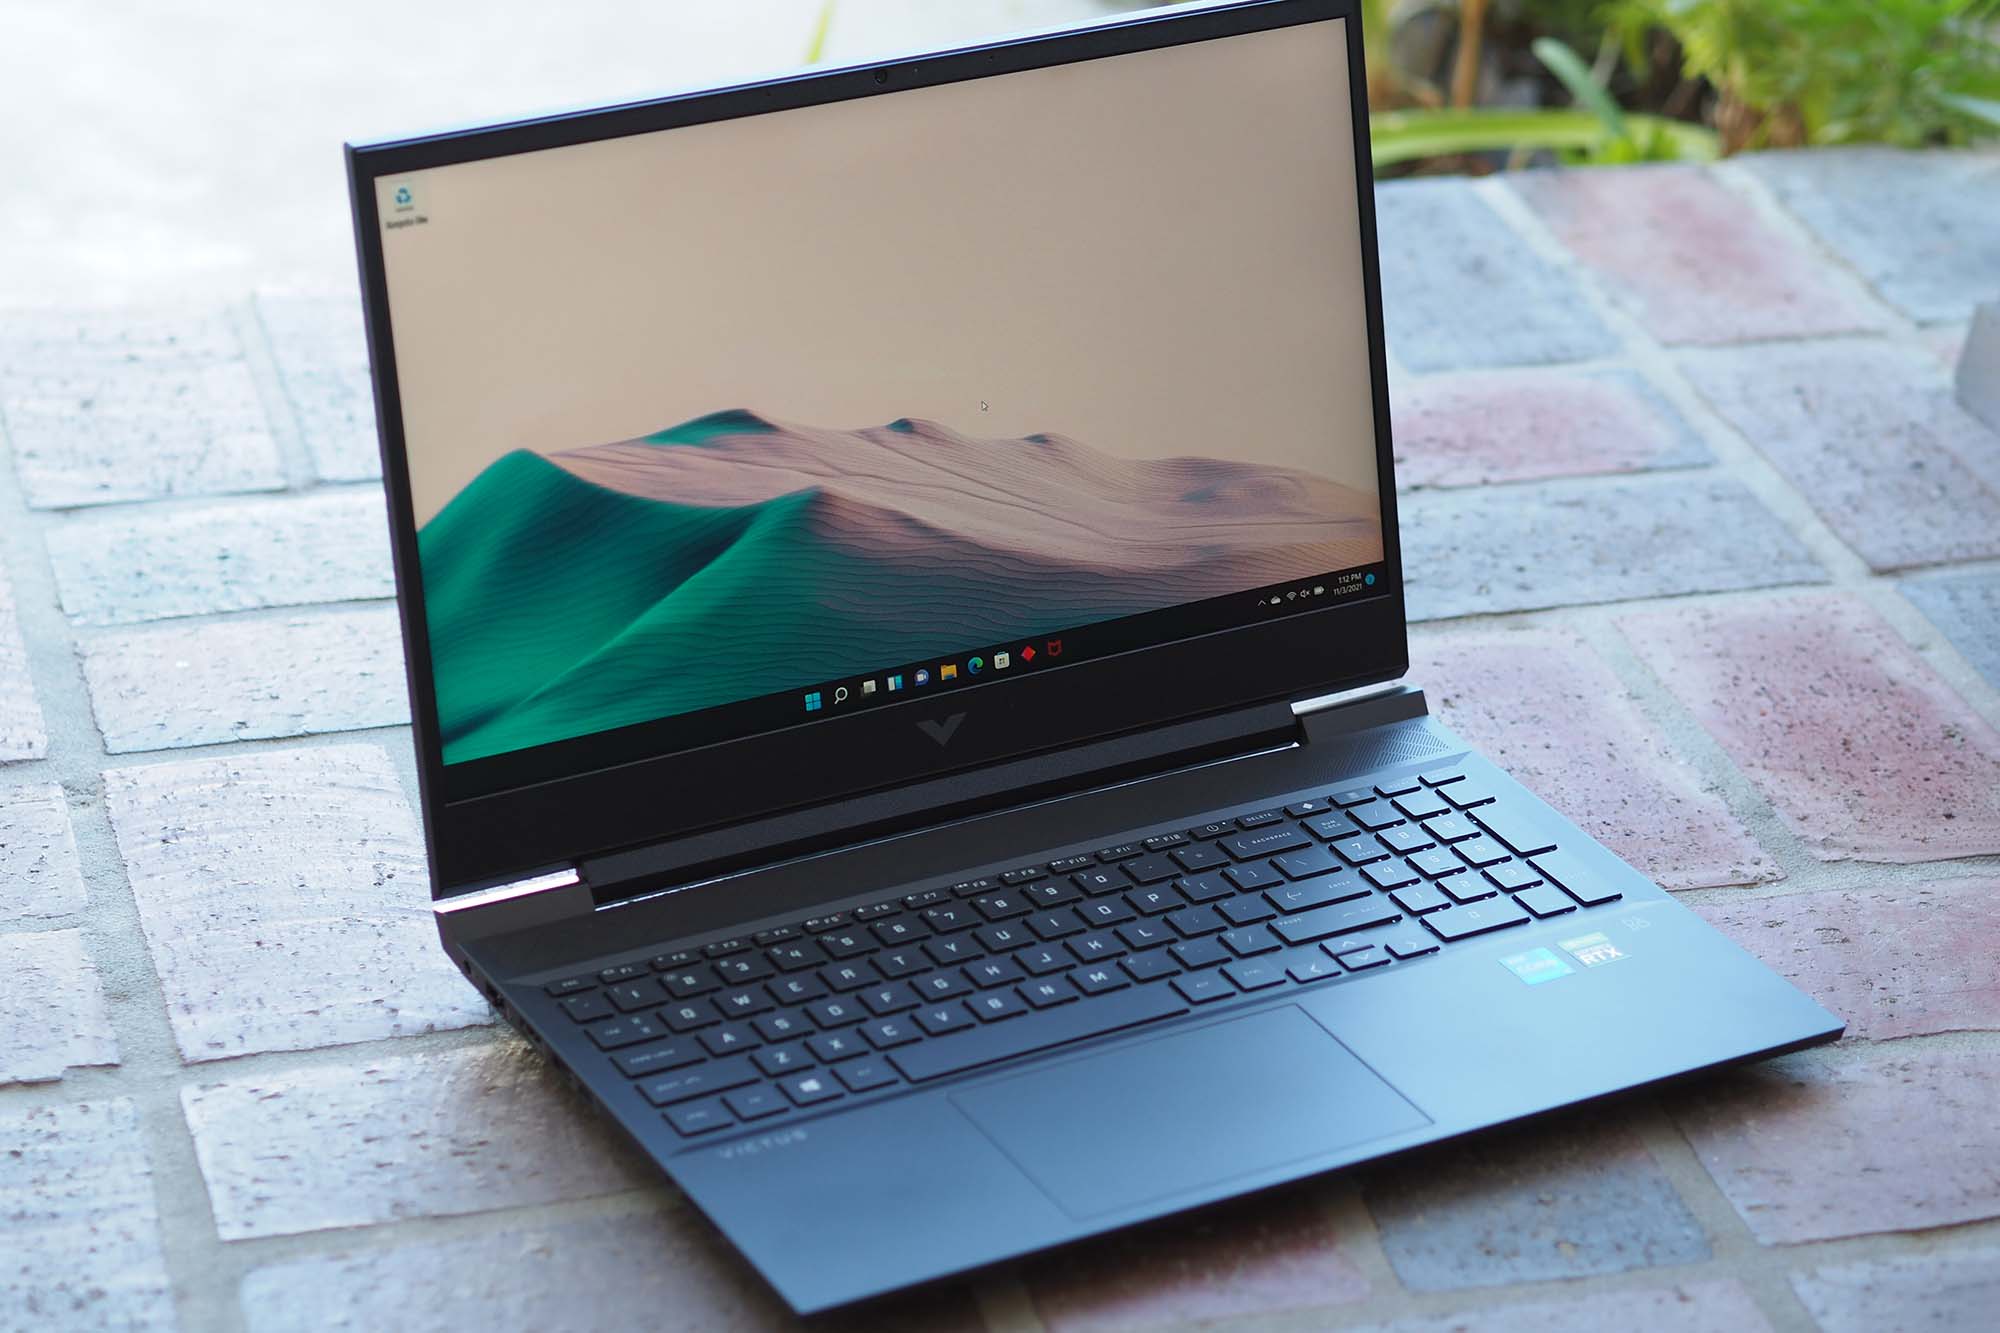 What Are Good Specs for a Gaming Laptop in 2021?